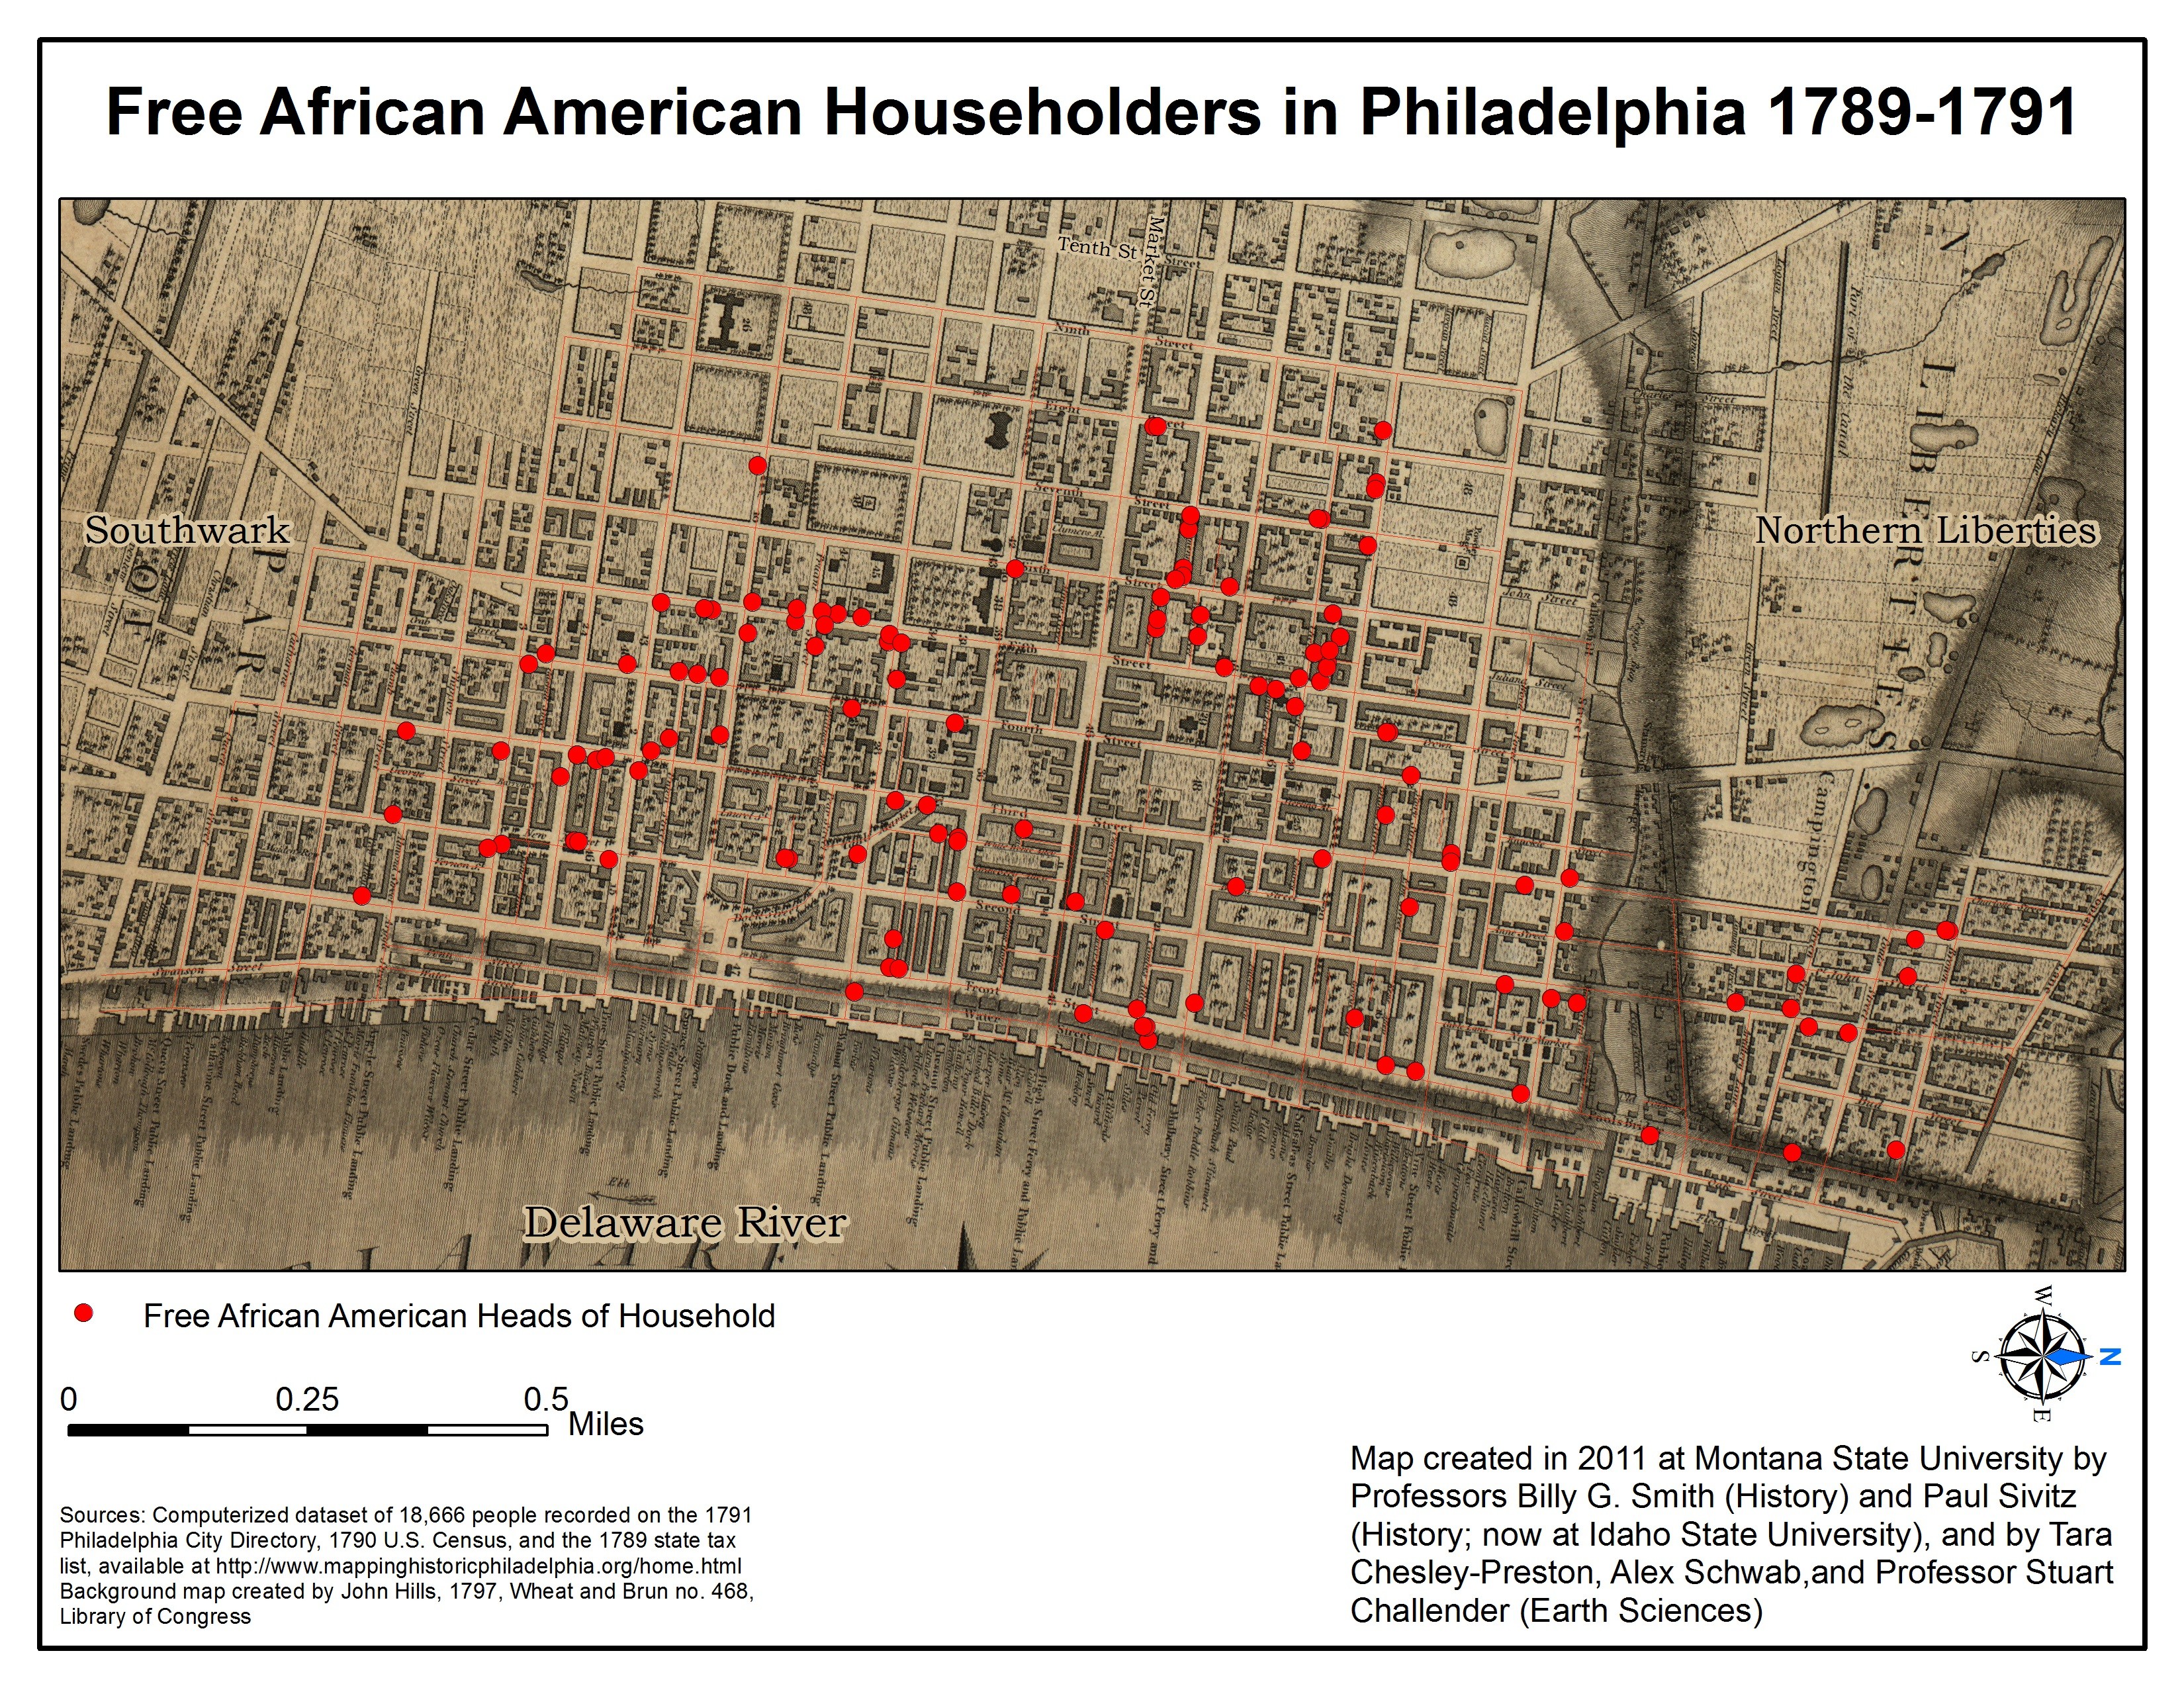 18th century map of Philadelphia with red dots